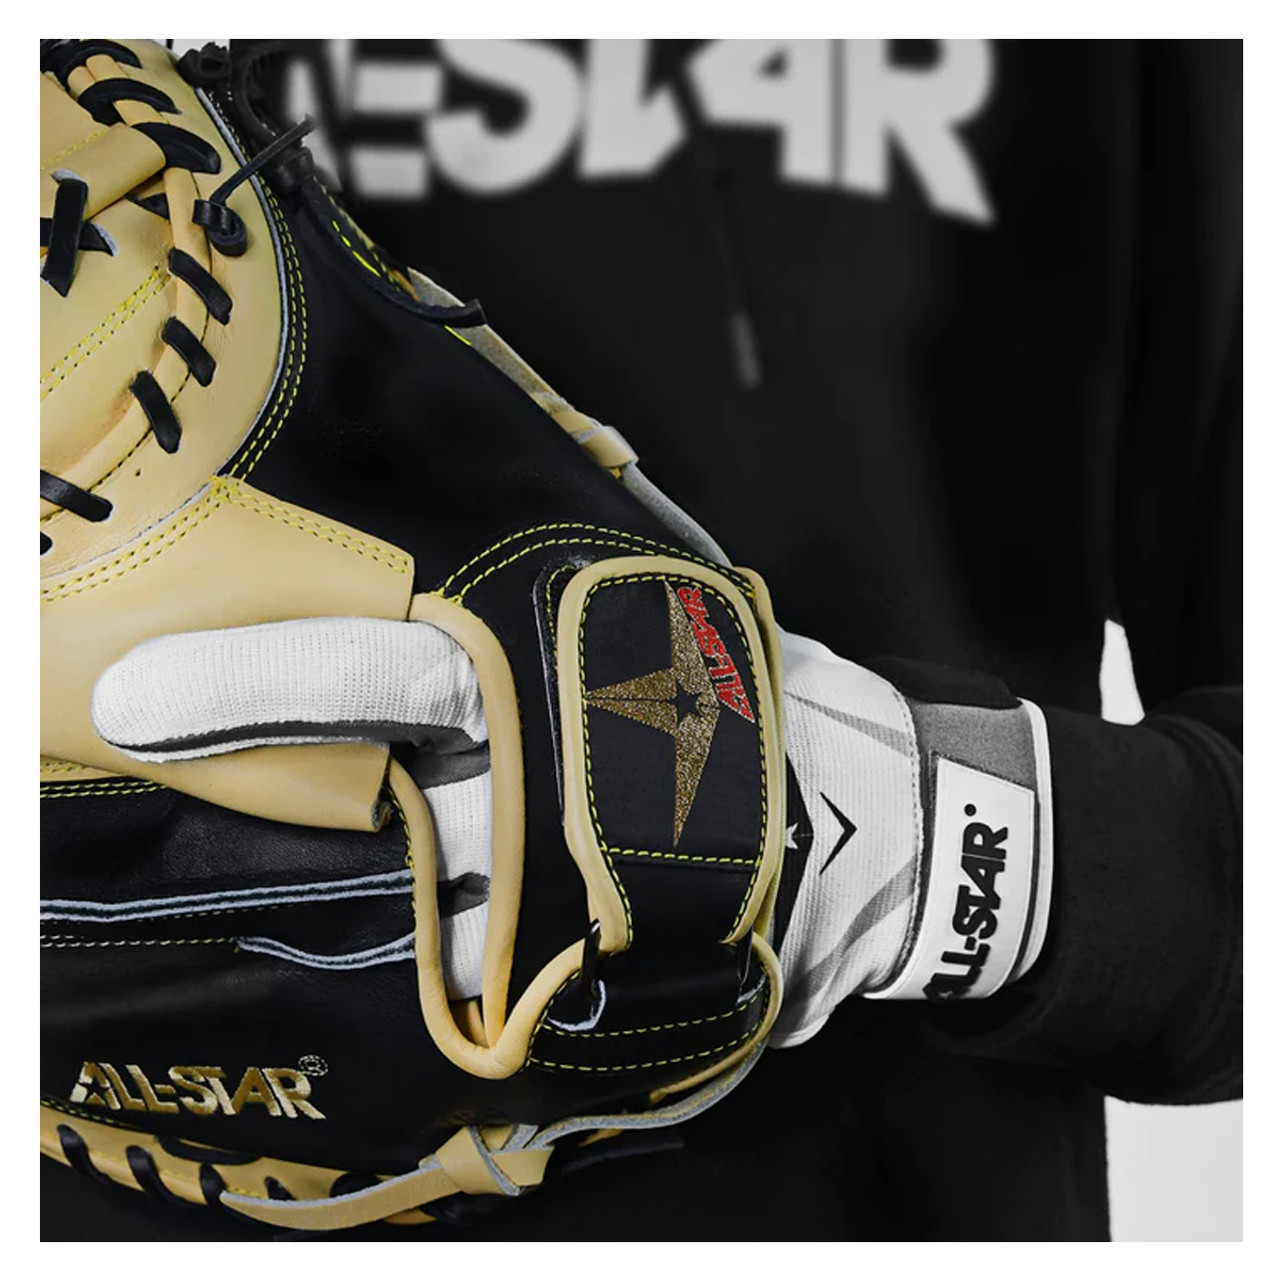 All-Star Baseball System 7 Adult Protective Adult Padded Catcher's Inner  Glove